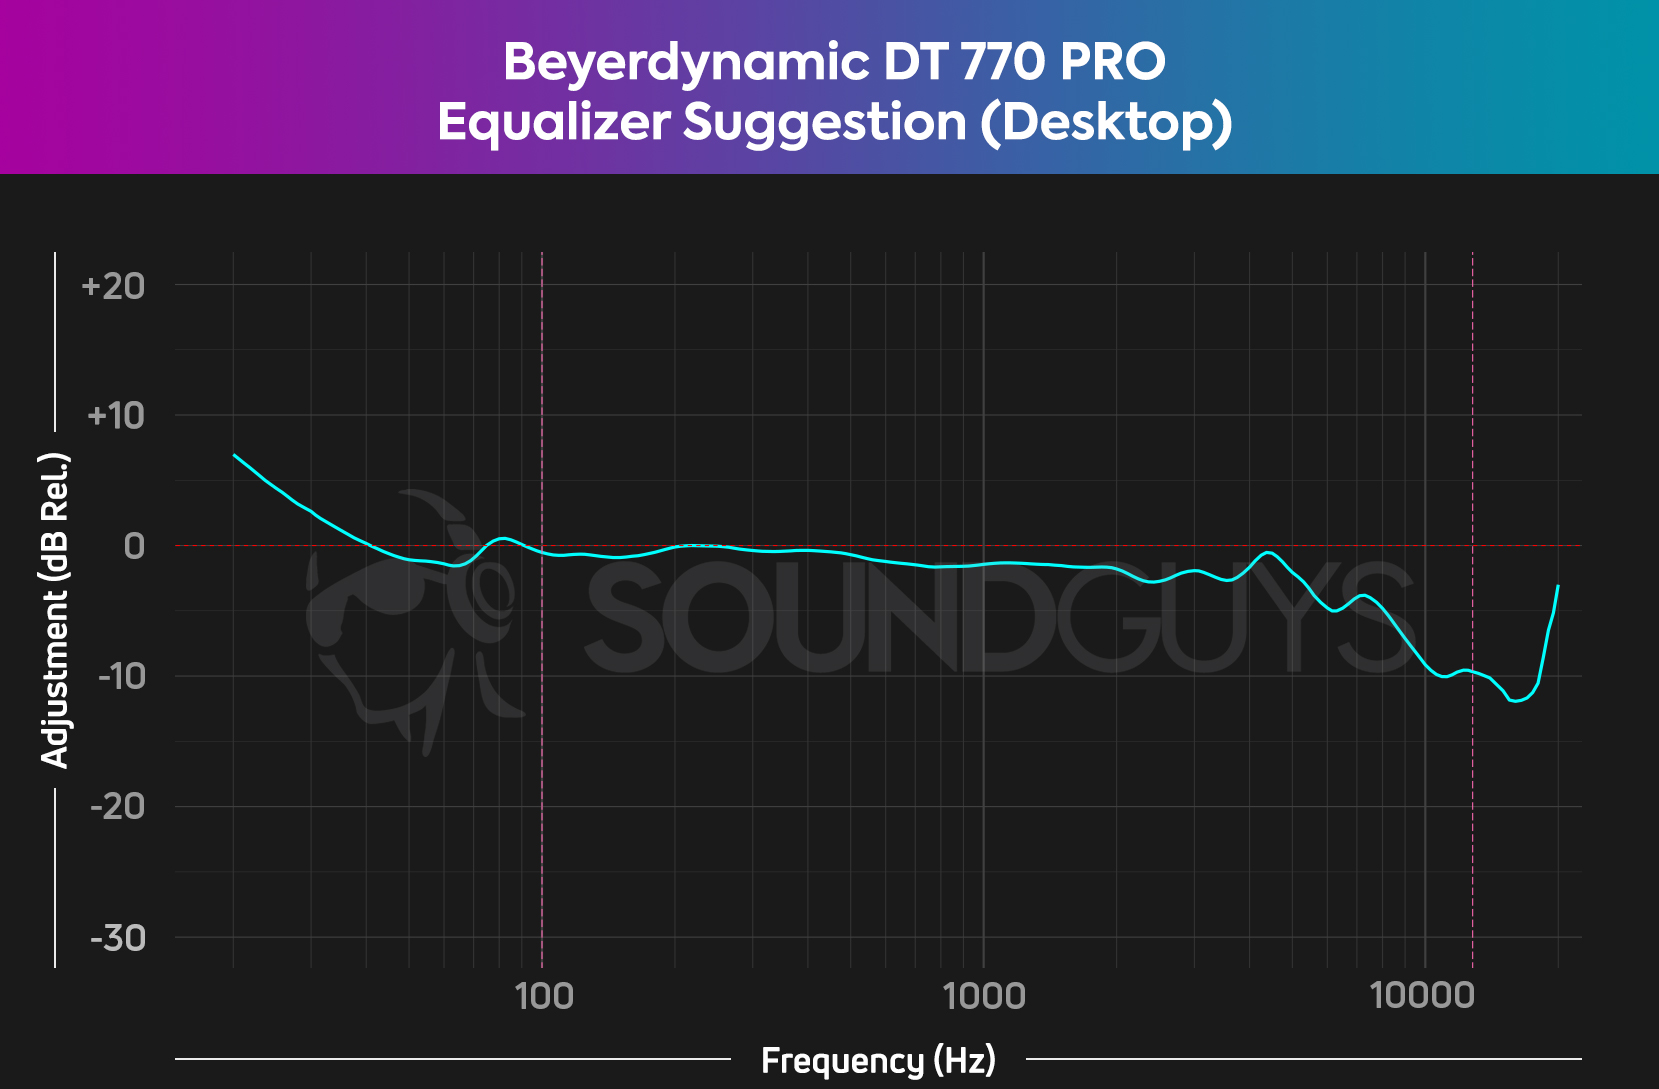 A plot showing the suggested equalizer tweaks for the Beyerdynamic DT770 Pro 80 ohm.